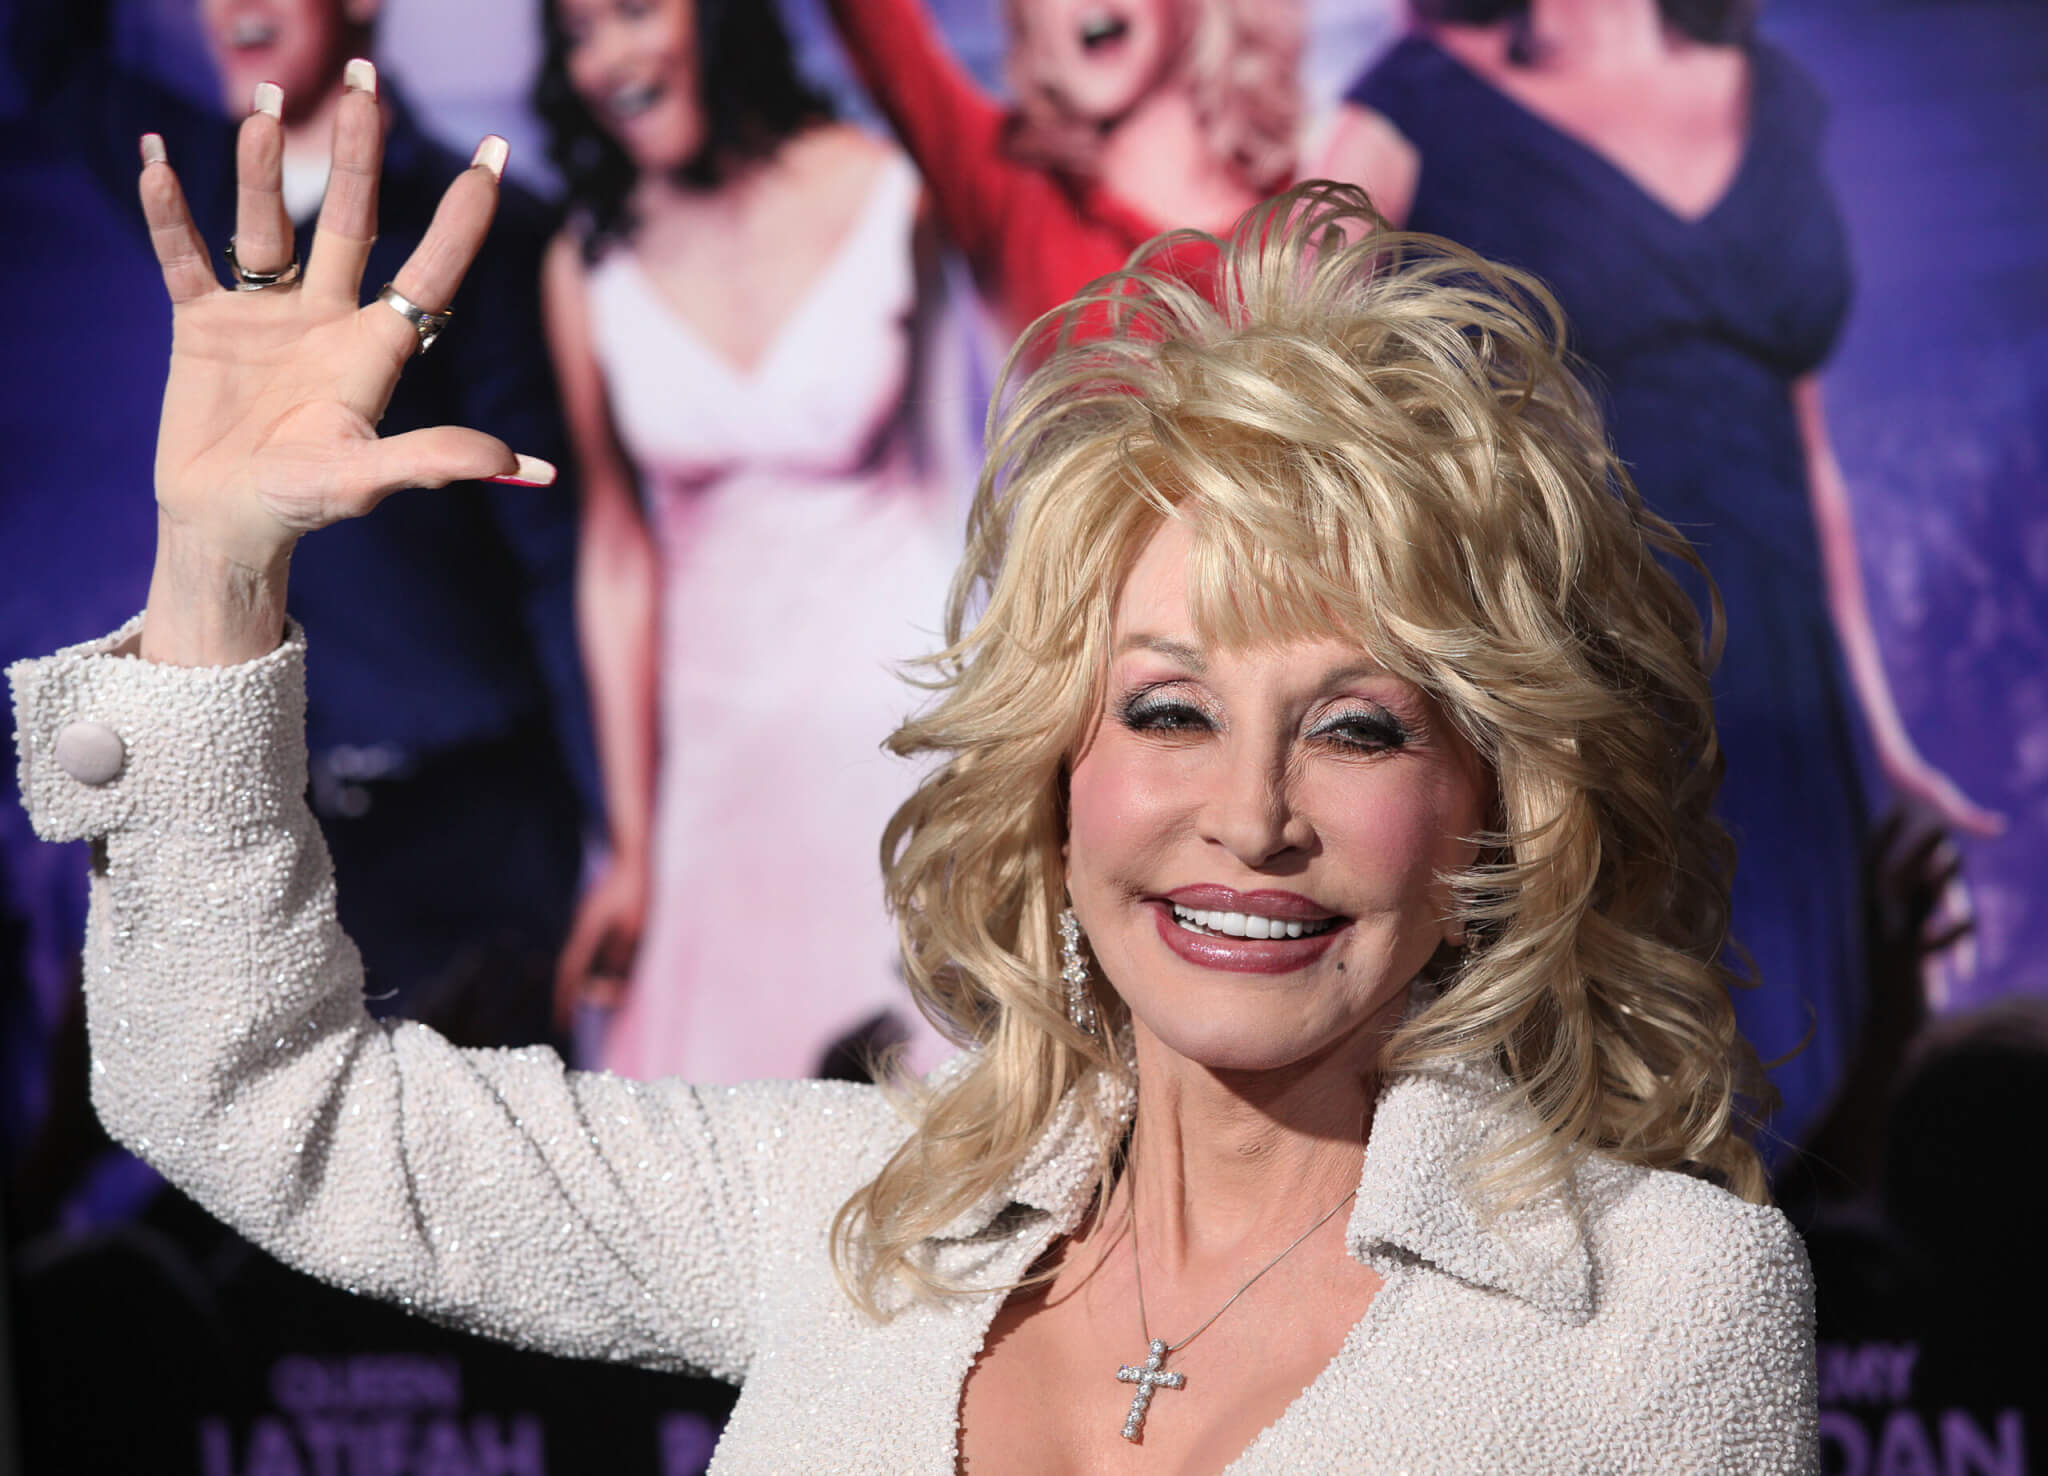 Dolly Parton waves to fans